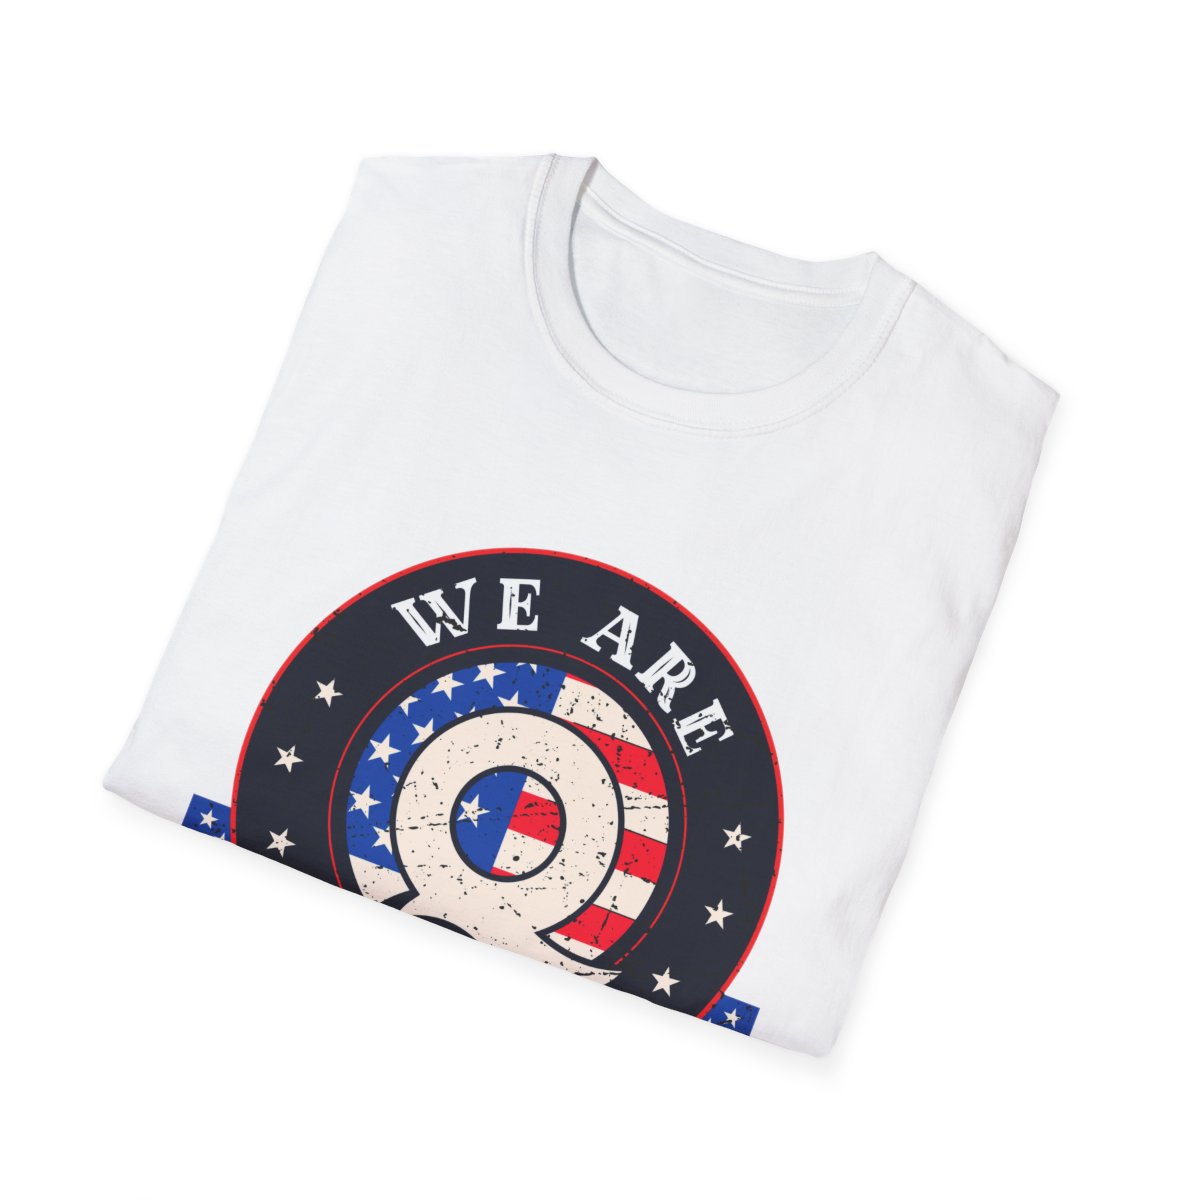 We Are Q t-shirt product thumbnail image